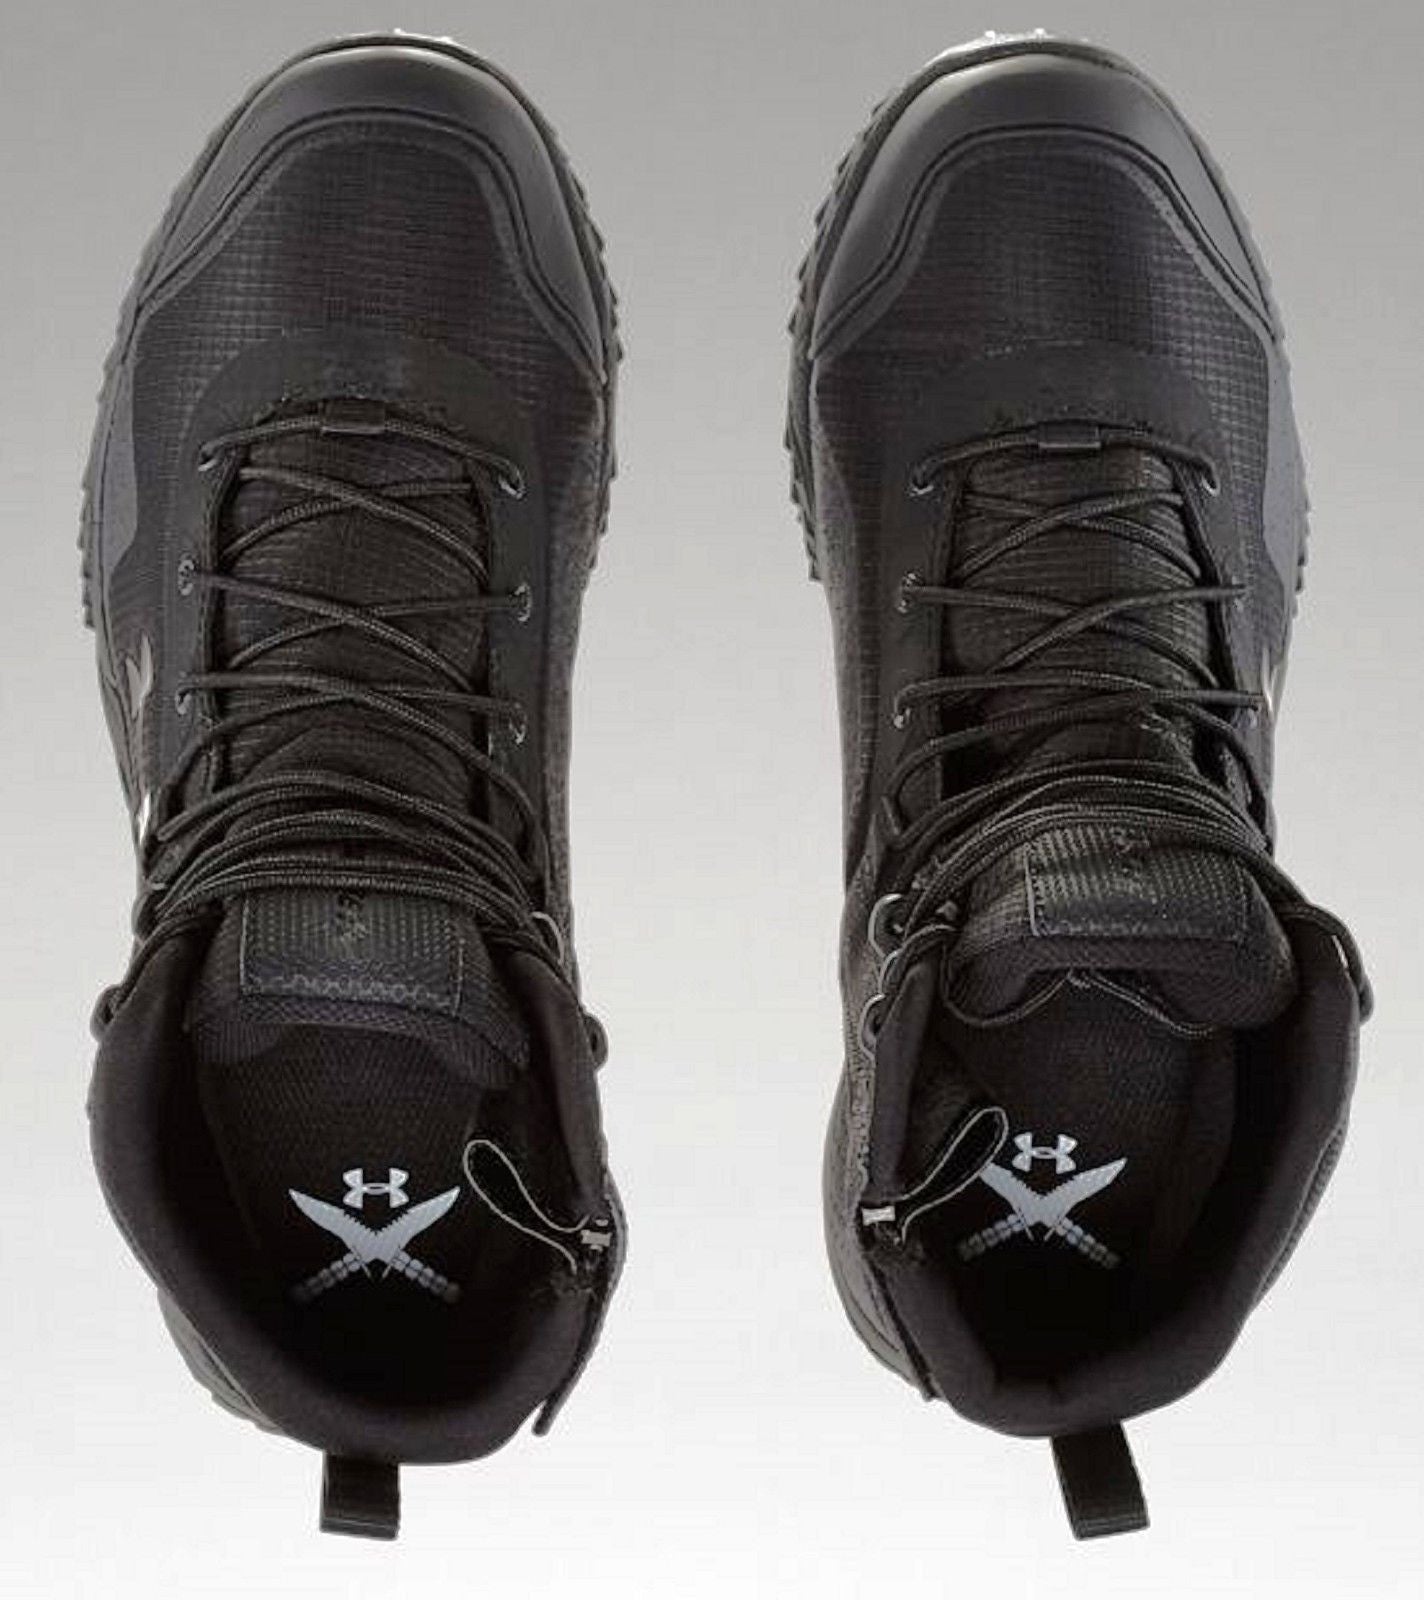 Under Armour Men's Valsetz RTS 1.5 Military and Tactical Boot, (001)/Black,  12